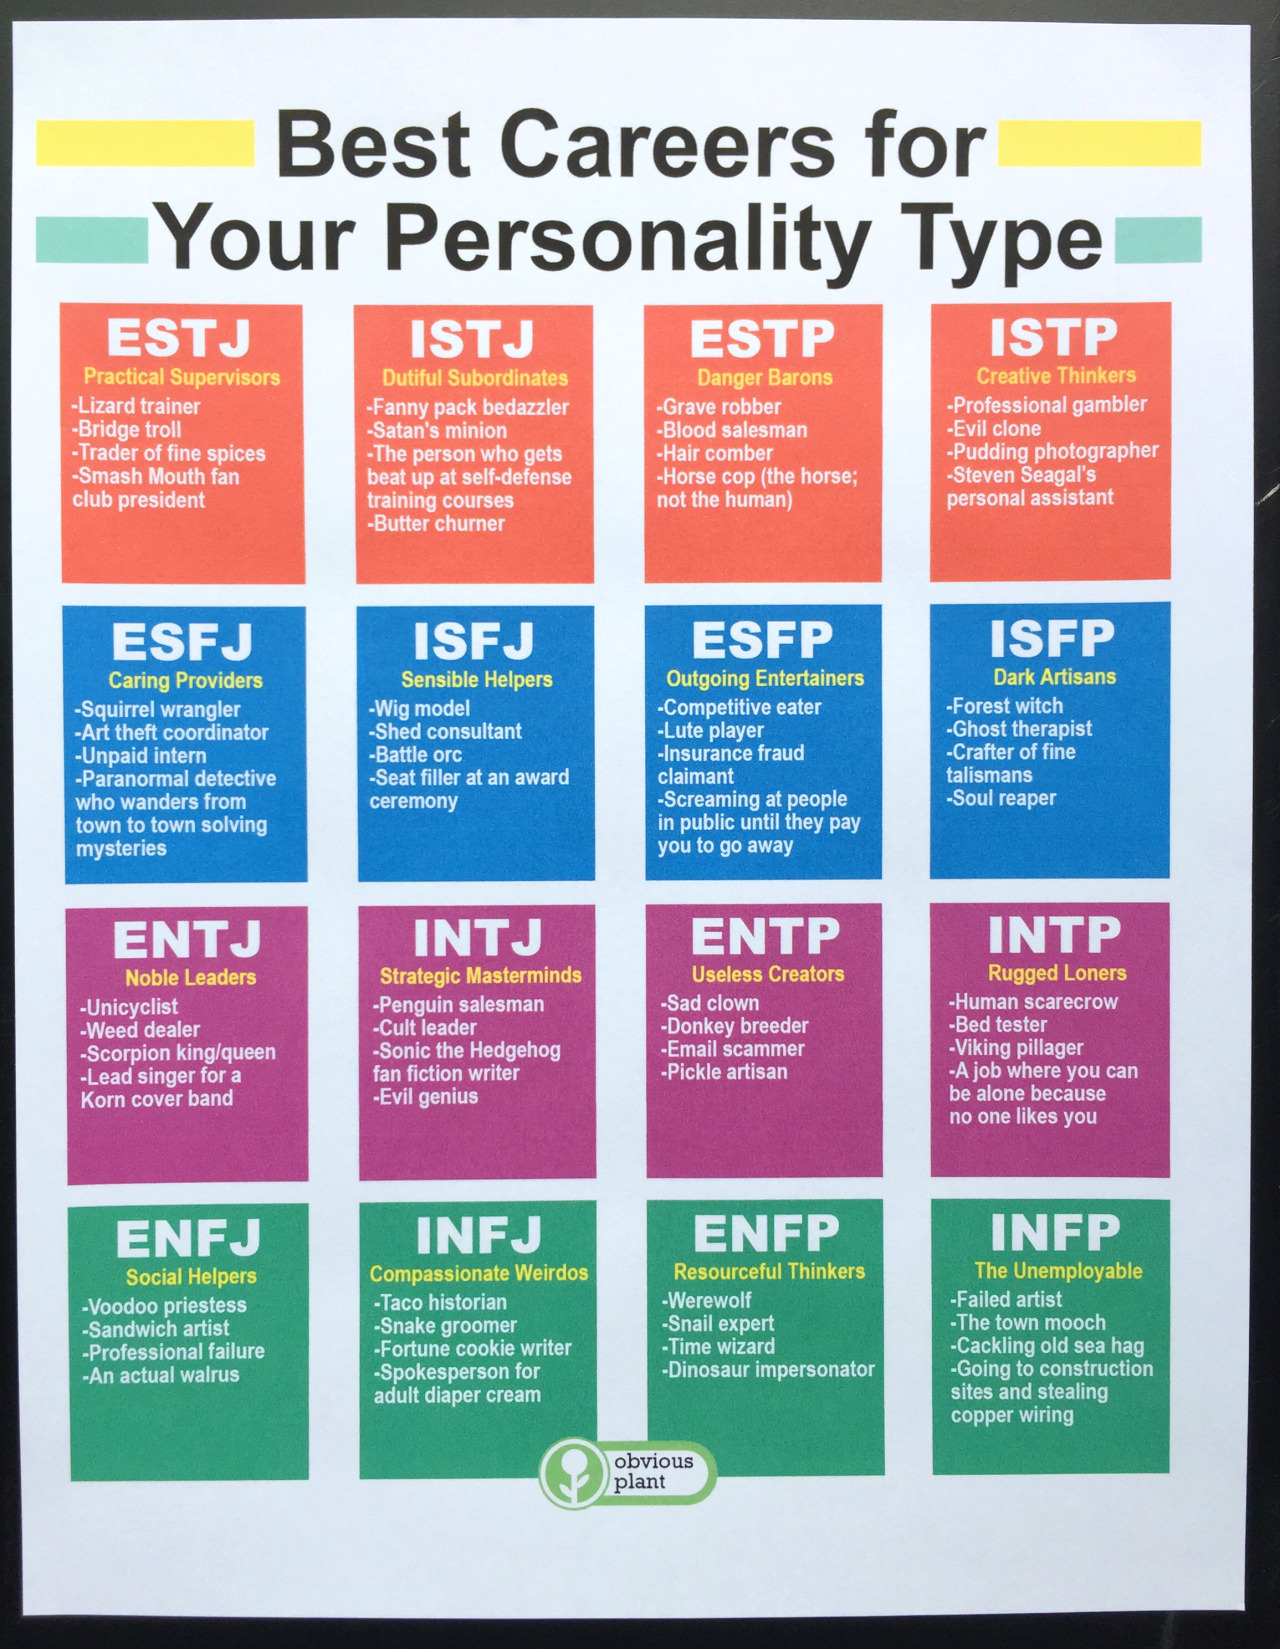 dating apps based on personality type